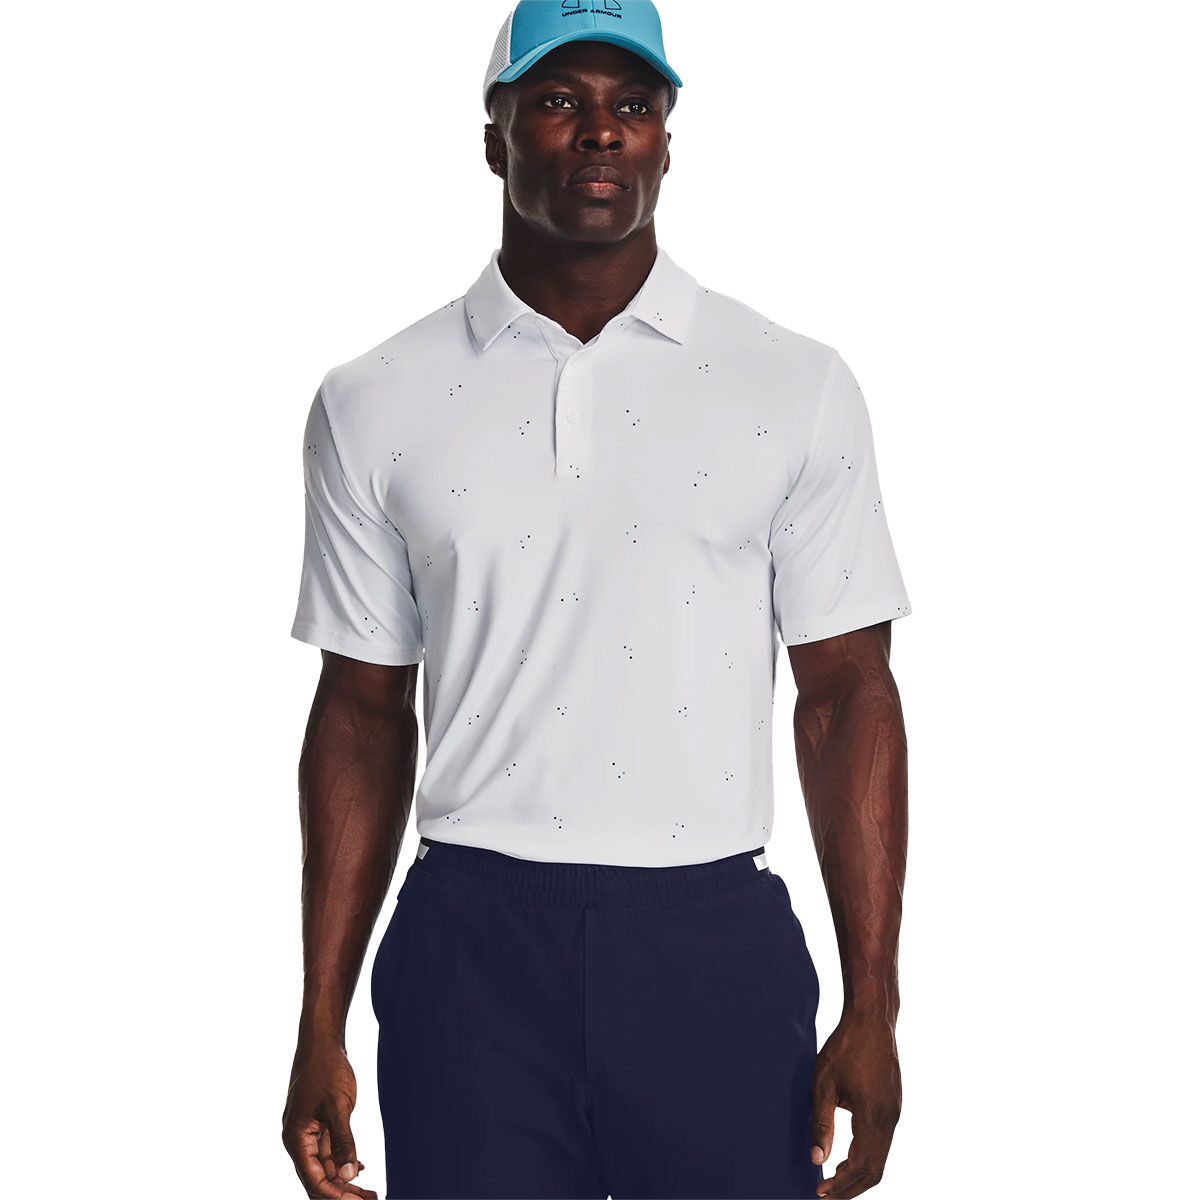 Under Armour Men’s Playoff 3.0 Printed Golf Polo Shirt, Mens, White/static blue, Xs | American Golf